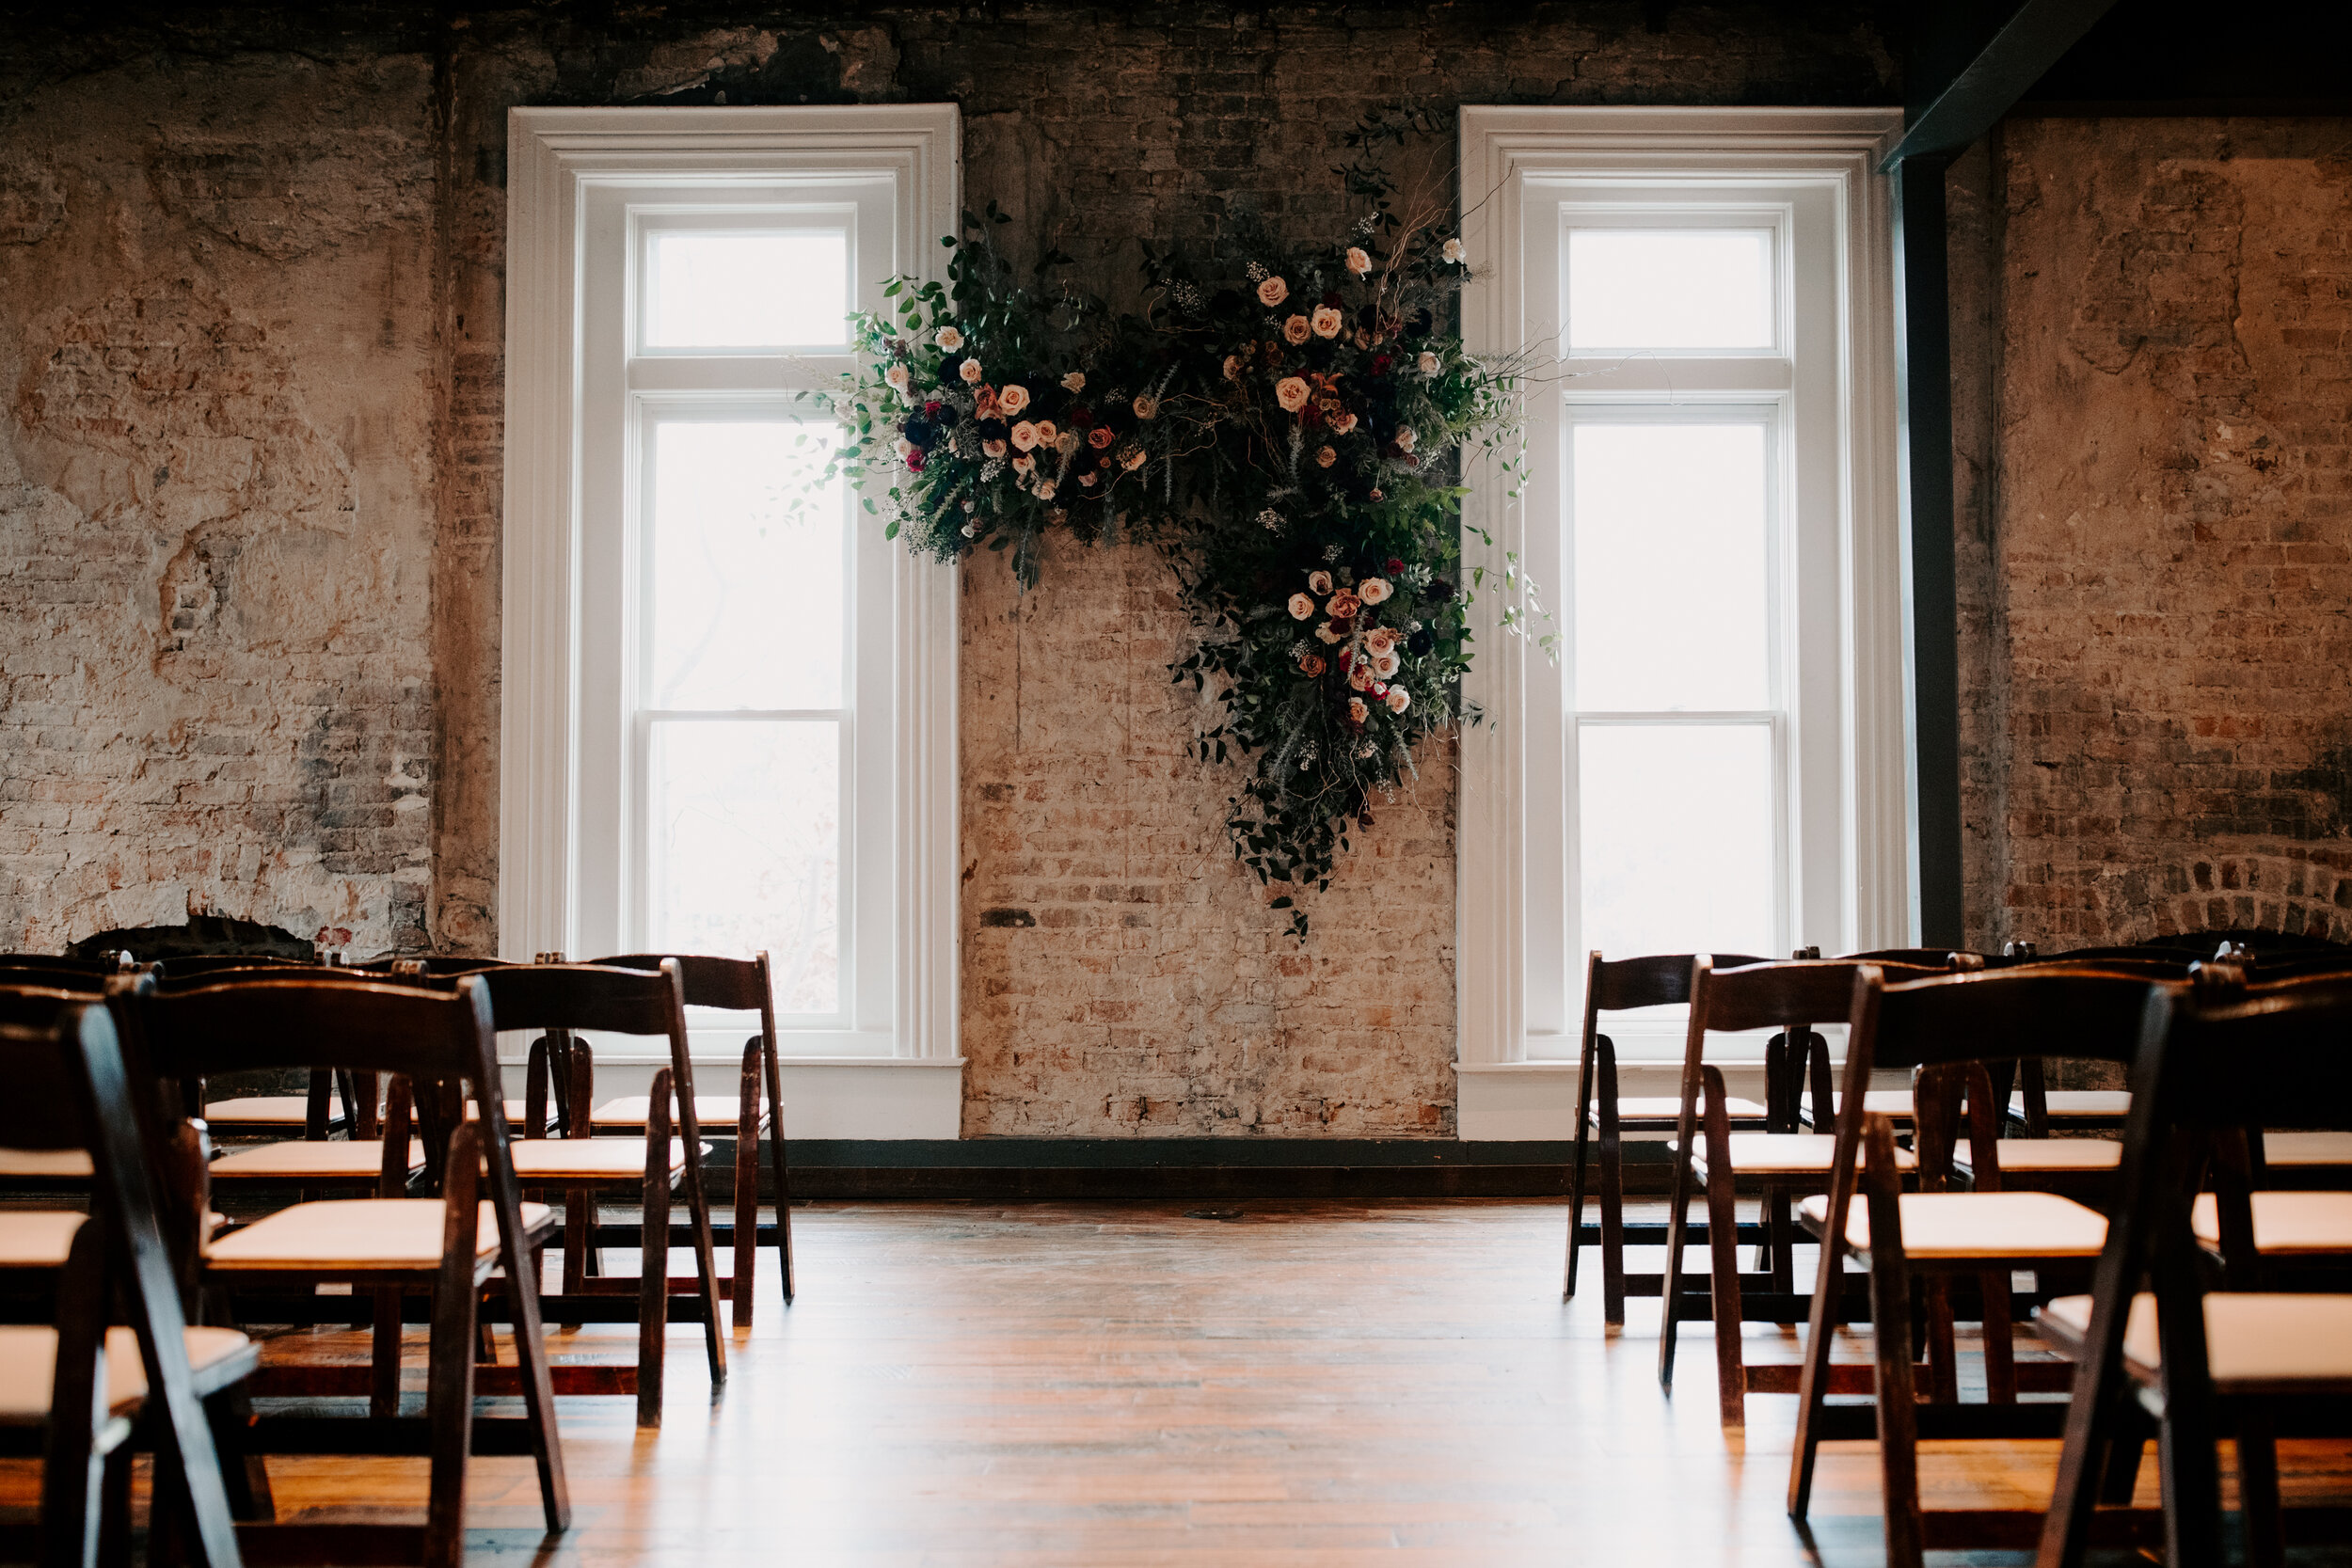 Organic, hanging floral installation for the wedding ceremony backdrop with lush greenery, curly willow branches, and earth toned and burgundy flowers. Nashville wedding florist at the Cordelle.